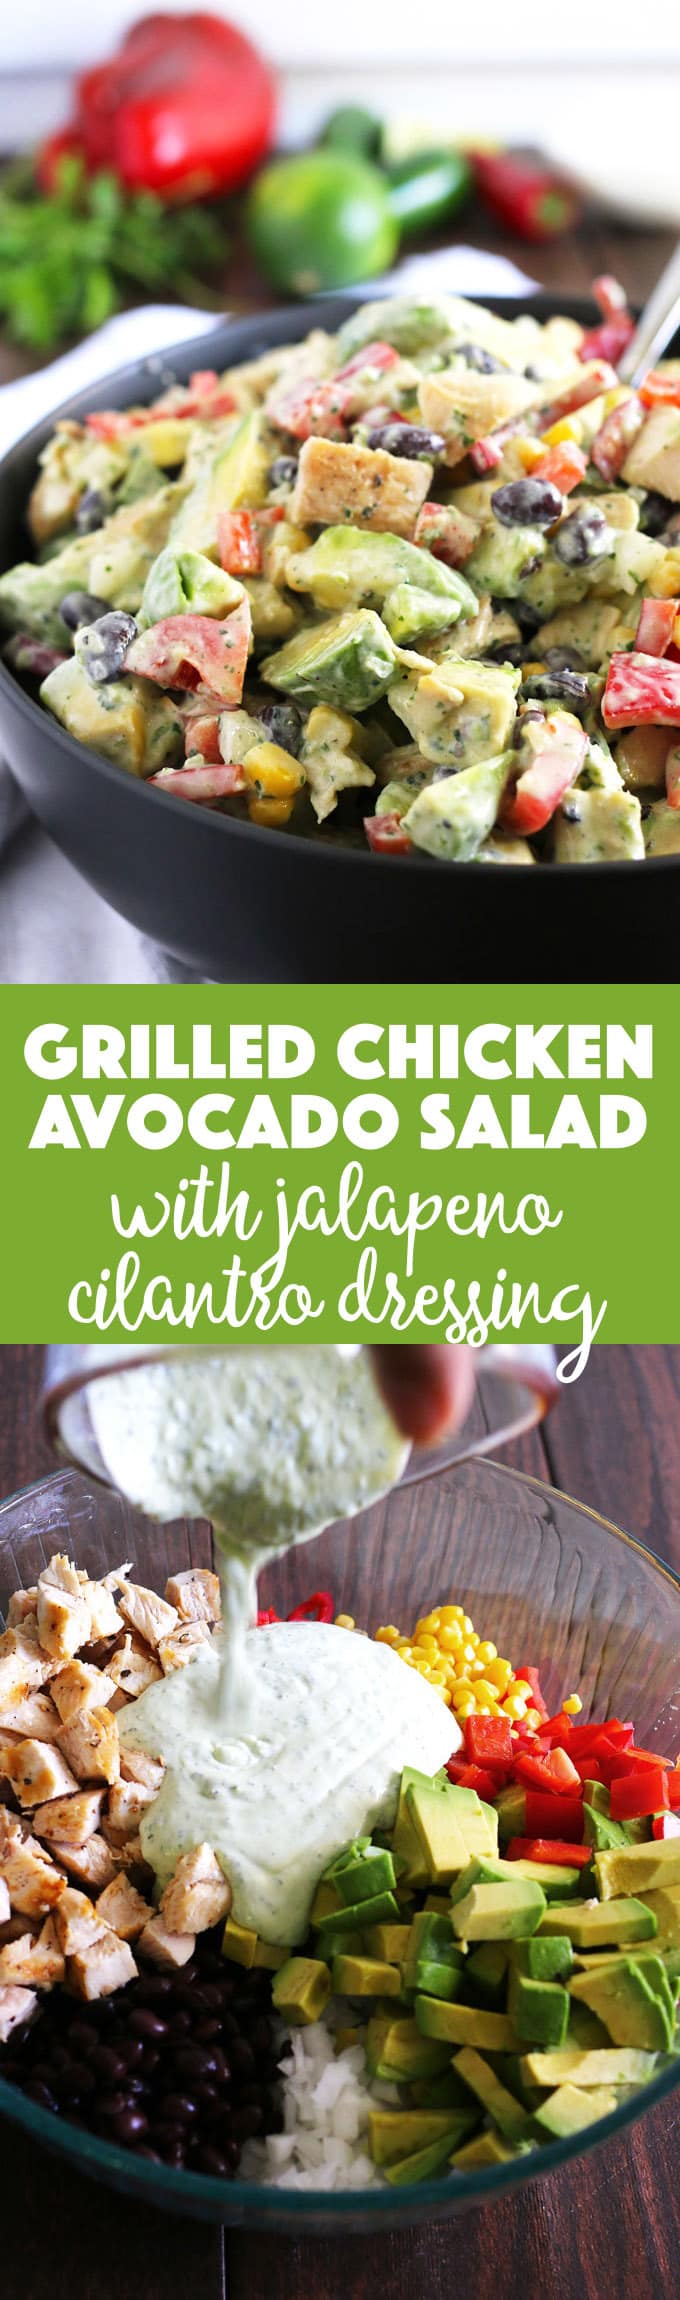 grilled chicken avocado salad is topped with homemade jalapeno cilantro dressing pin